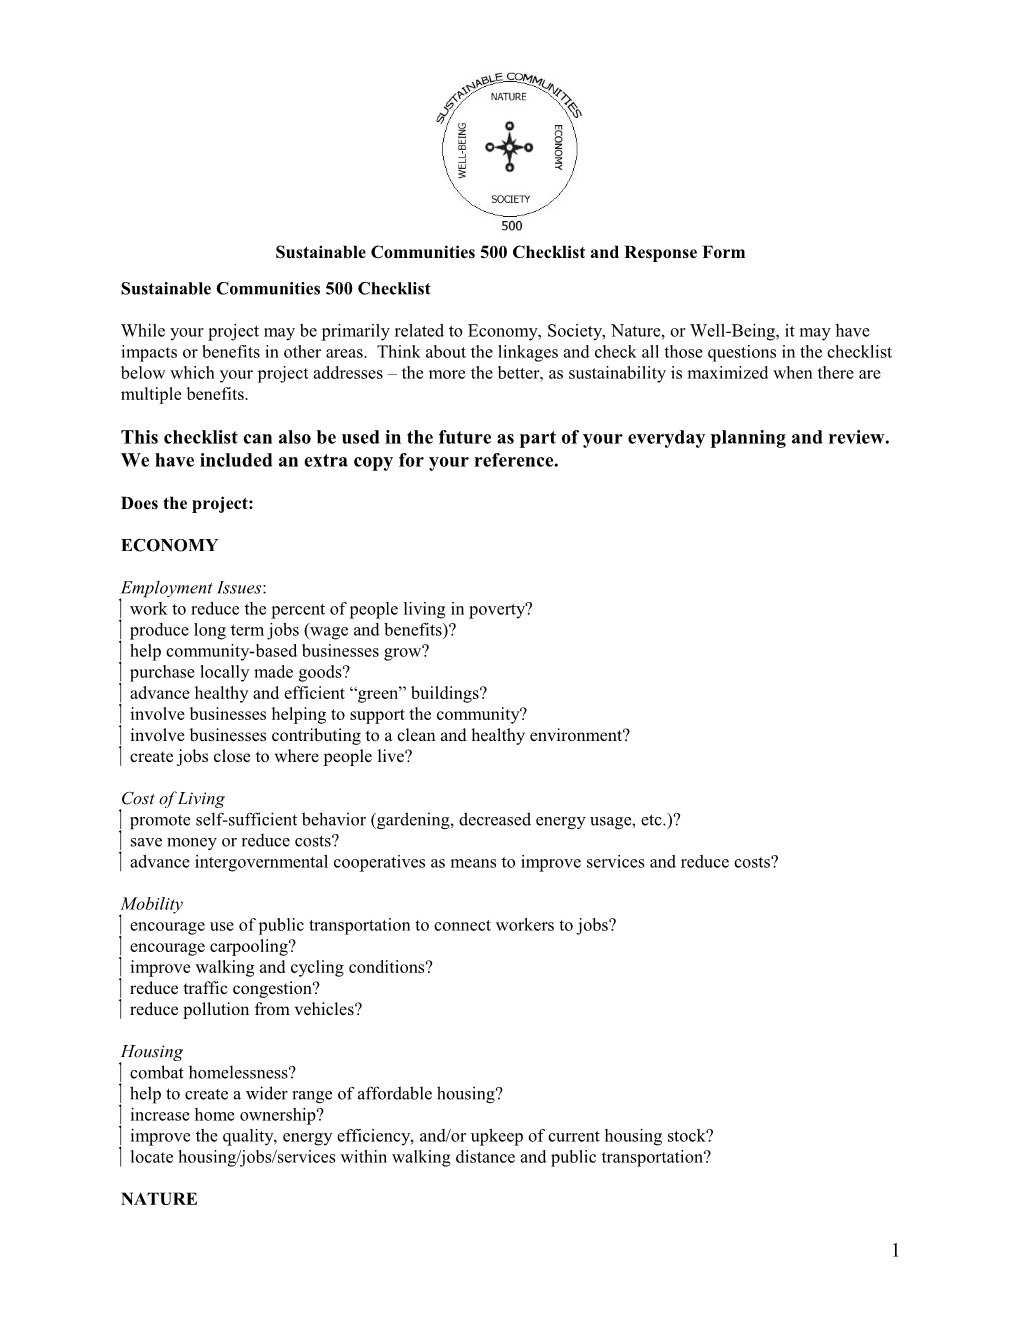 Sustainable Communities 500 Checklist And Response Form